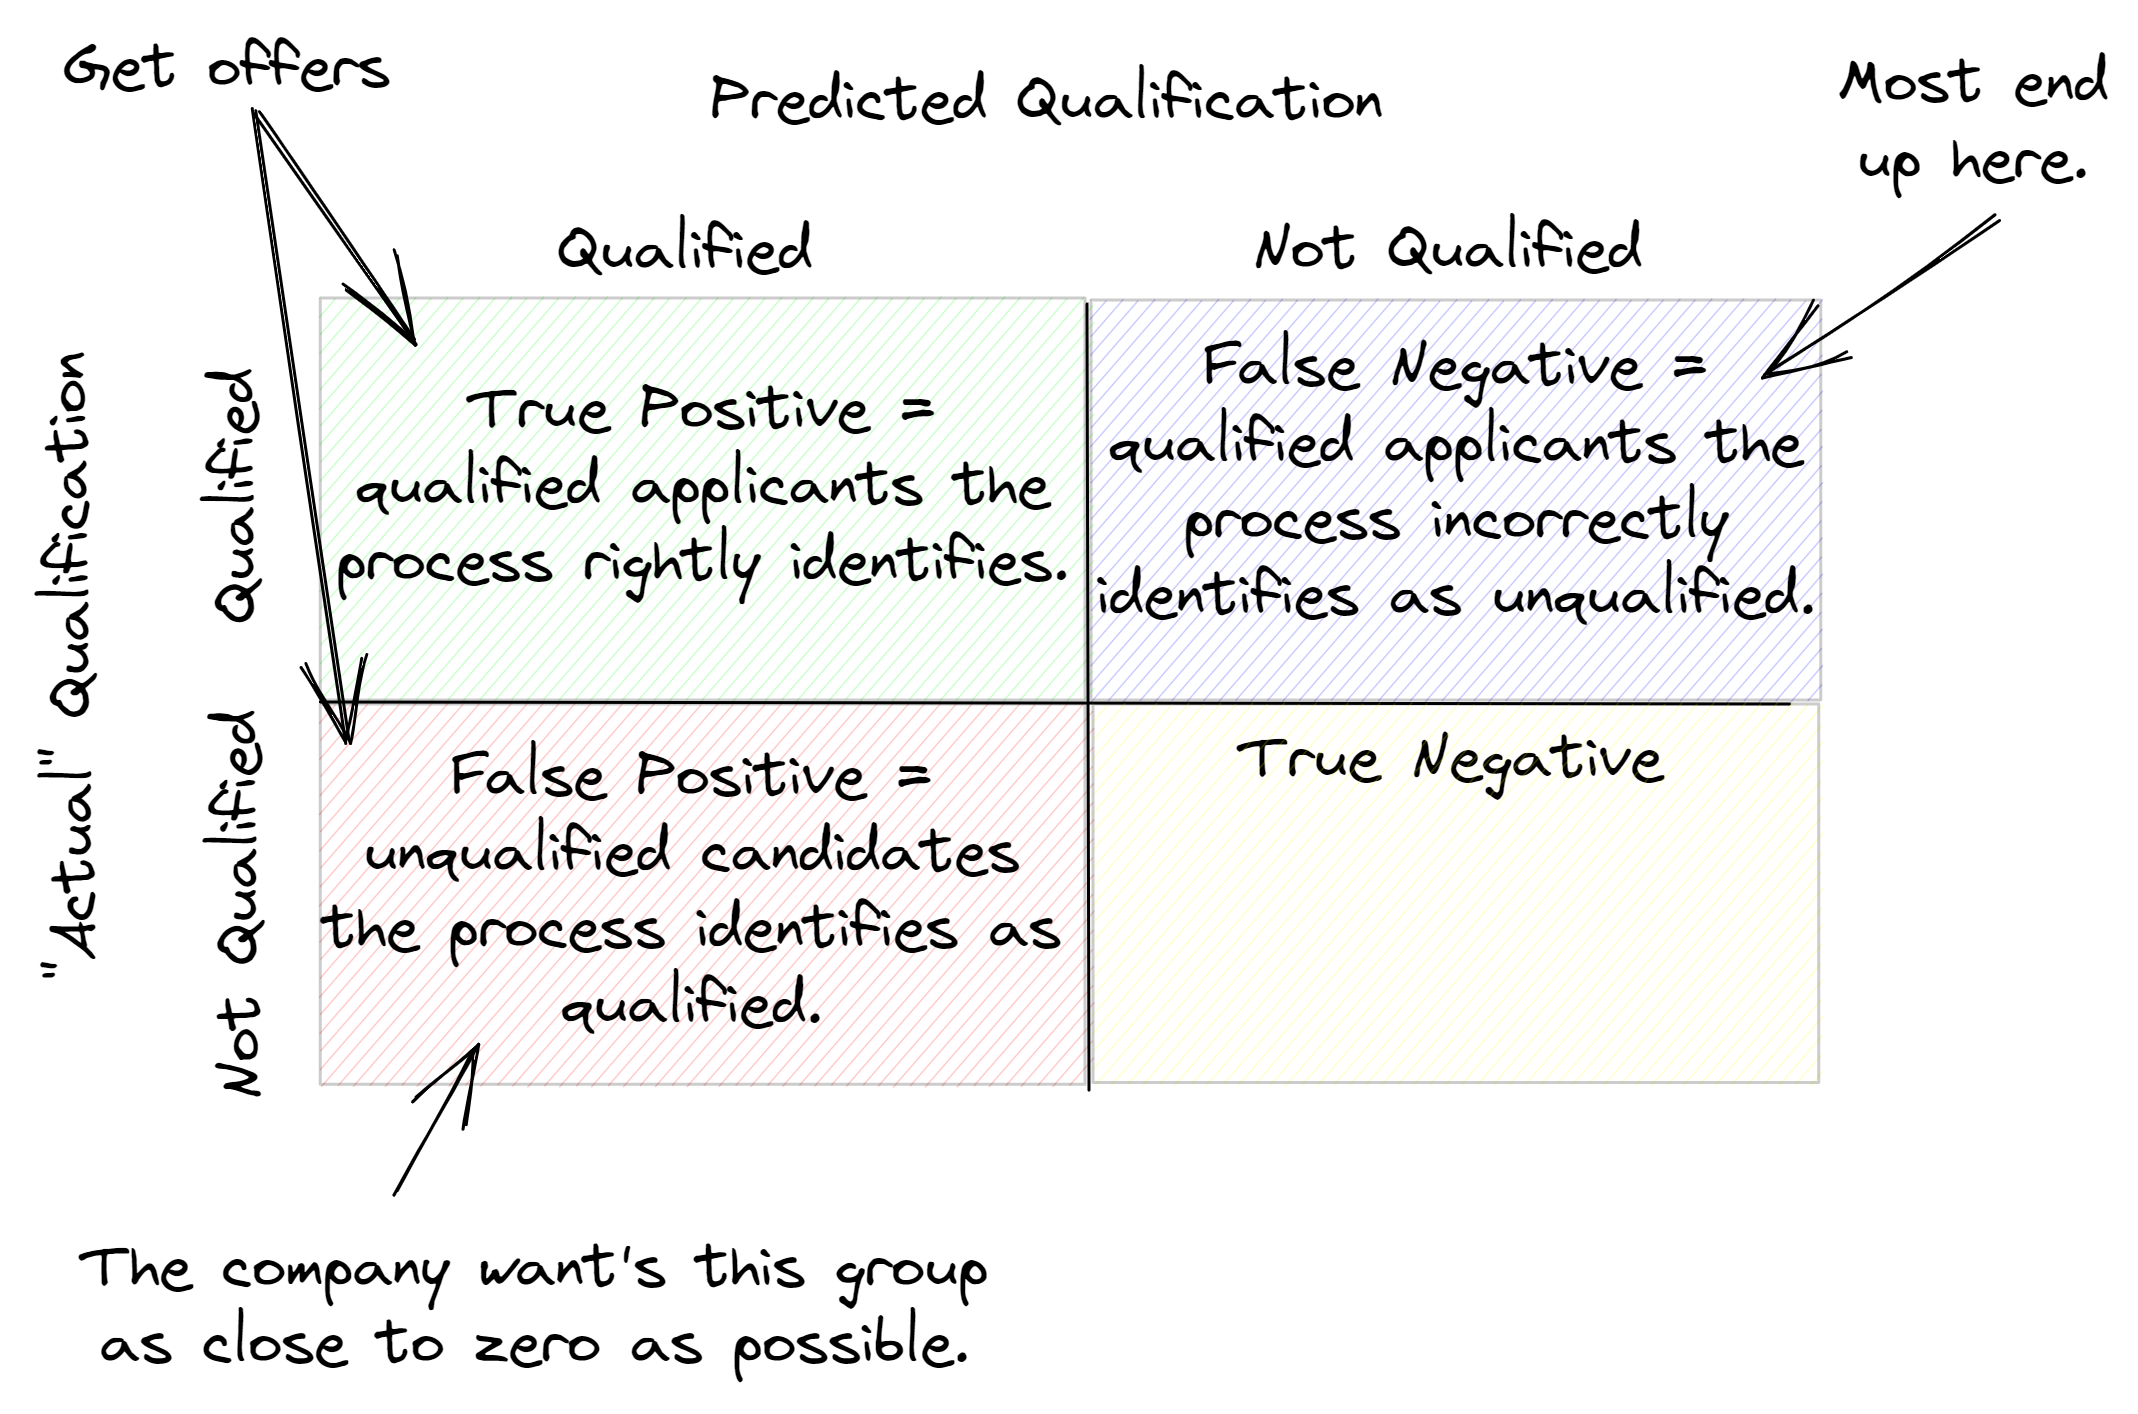 Confusion matix diagram, classifying the types of applicants, where those in the green box are qualified and the interview says they are, those in the blue box are qualified but the interview says they aren’t, those in the red box who aren’t qualified but the interview says they are, and those in the yellow box who aren’t qualified and the interview says they arent. Companies try to minimize persons who fall into the red box. Most persons fall into the blue box.